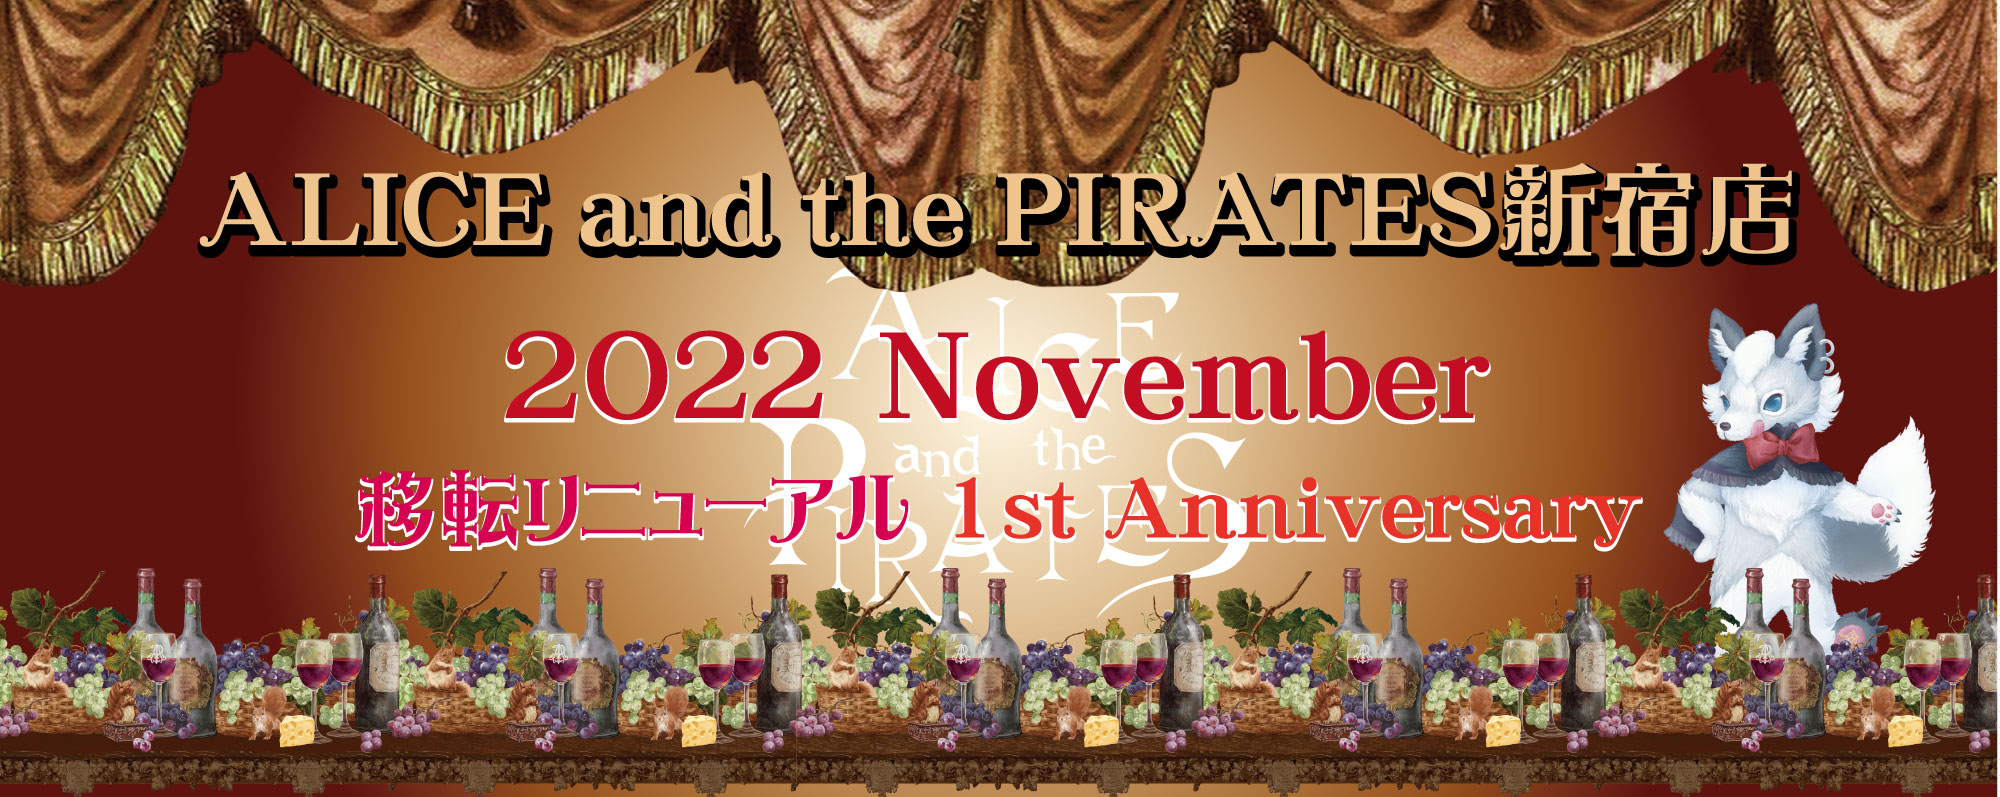 ALICE and the PIRATES新宿店 移転リニューアル1周年記念Special企画